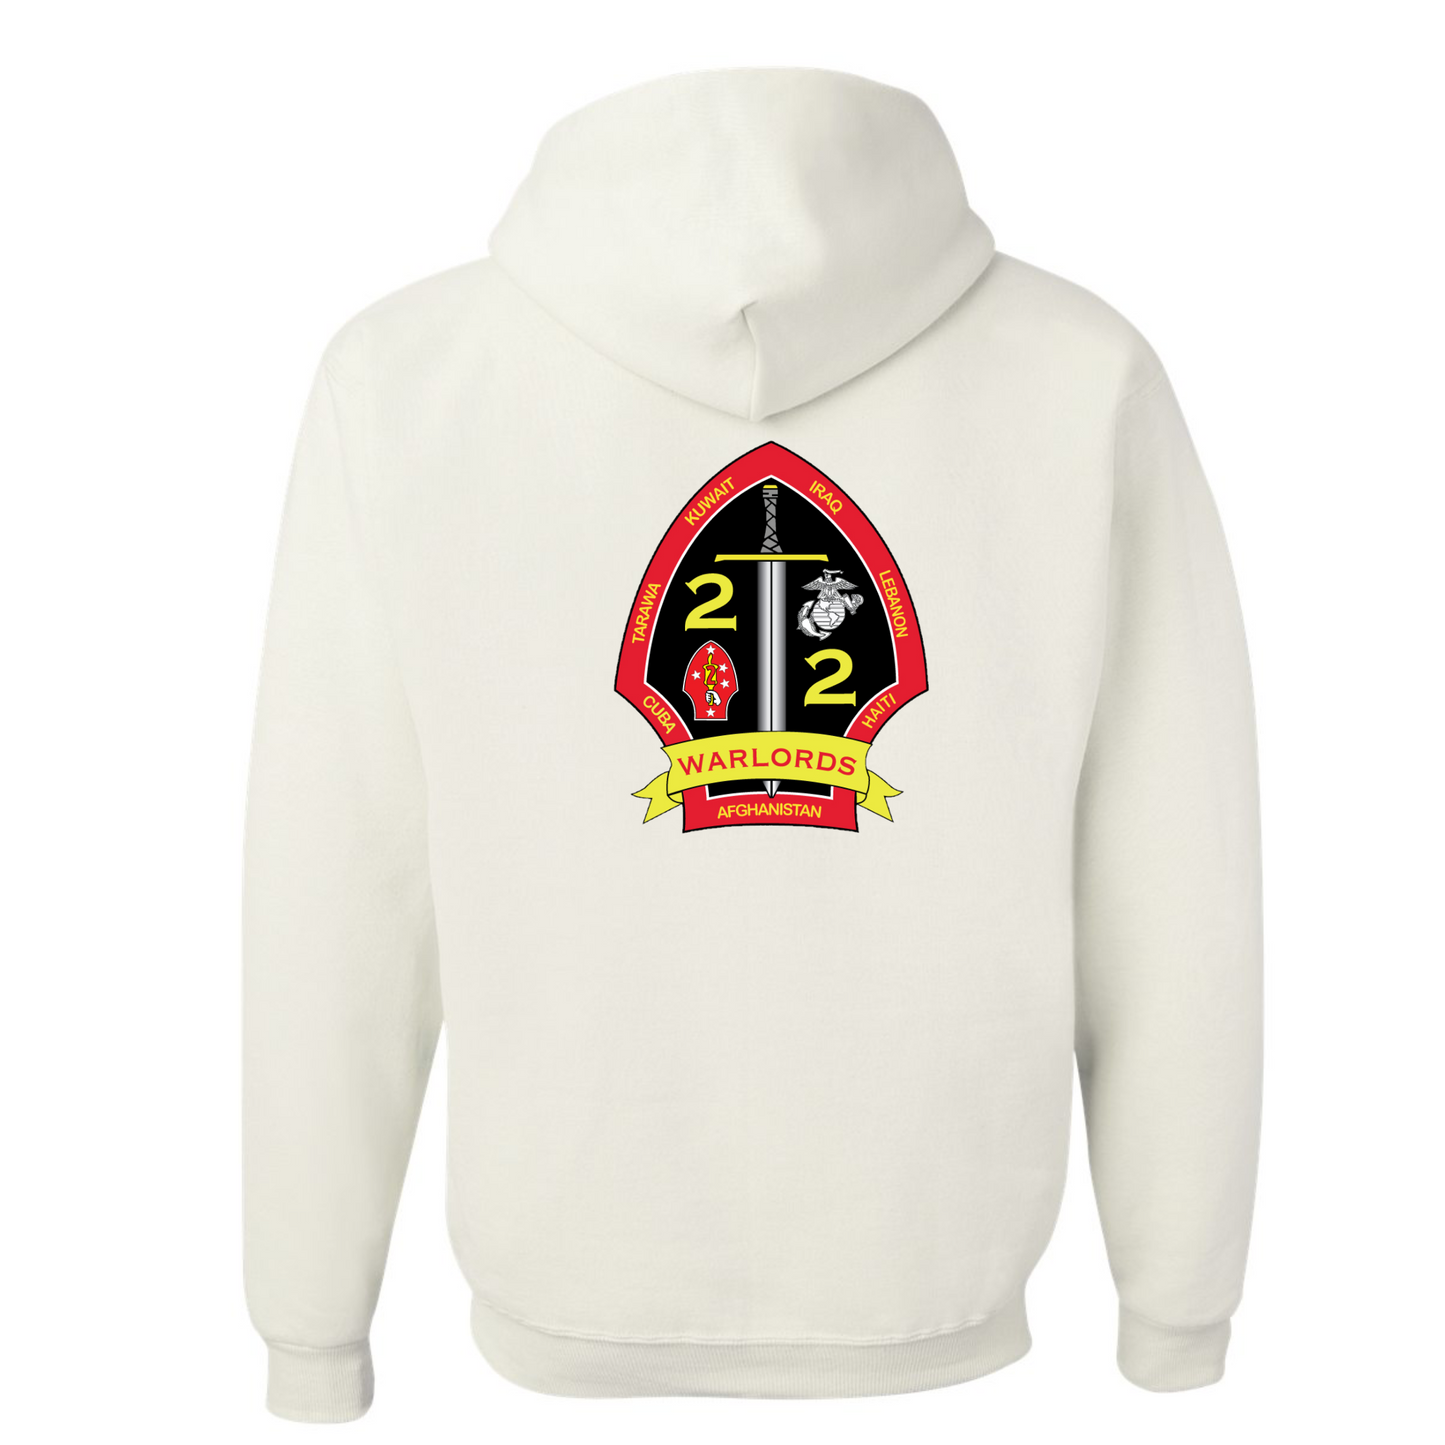 2nd Battalion 2nd Marines #1 Warlords Hoodies